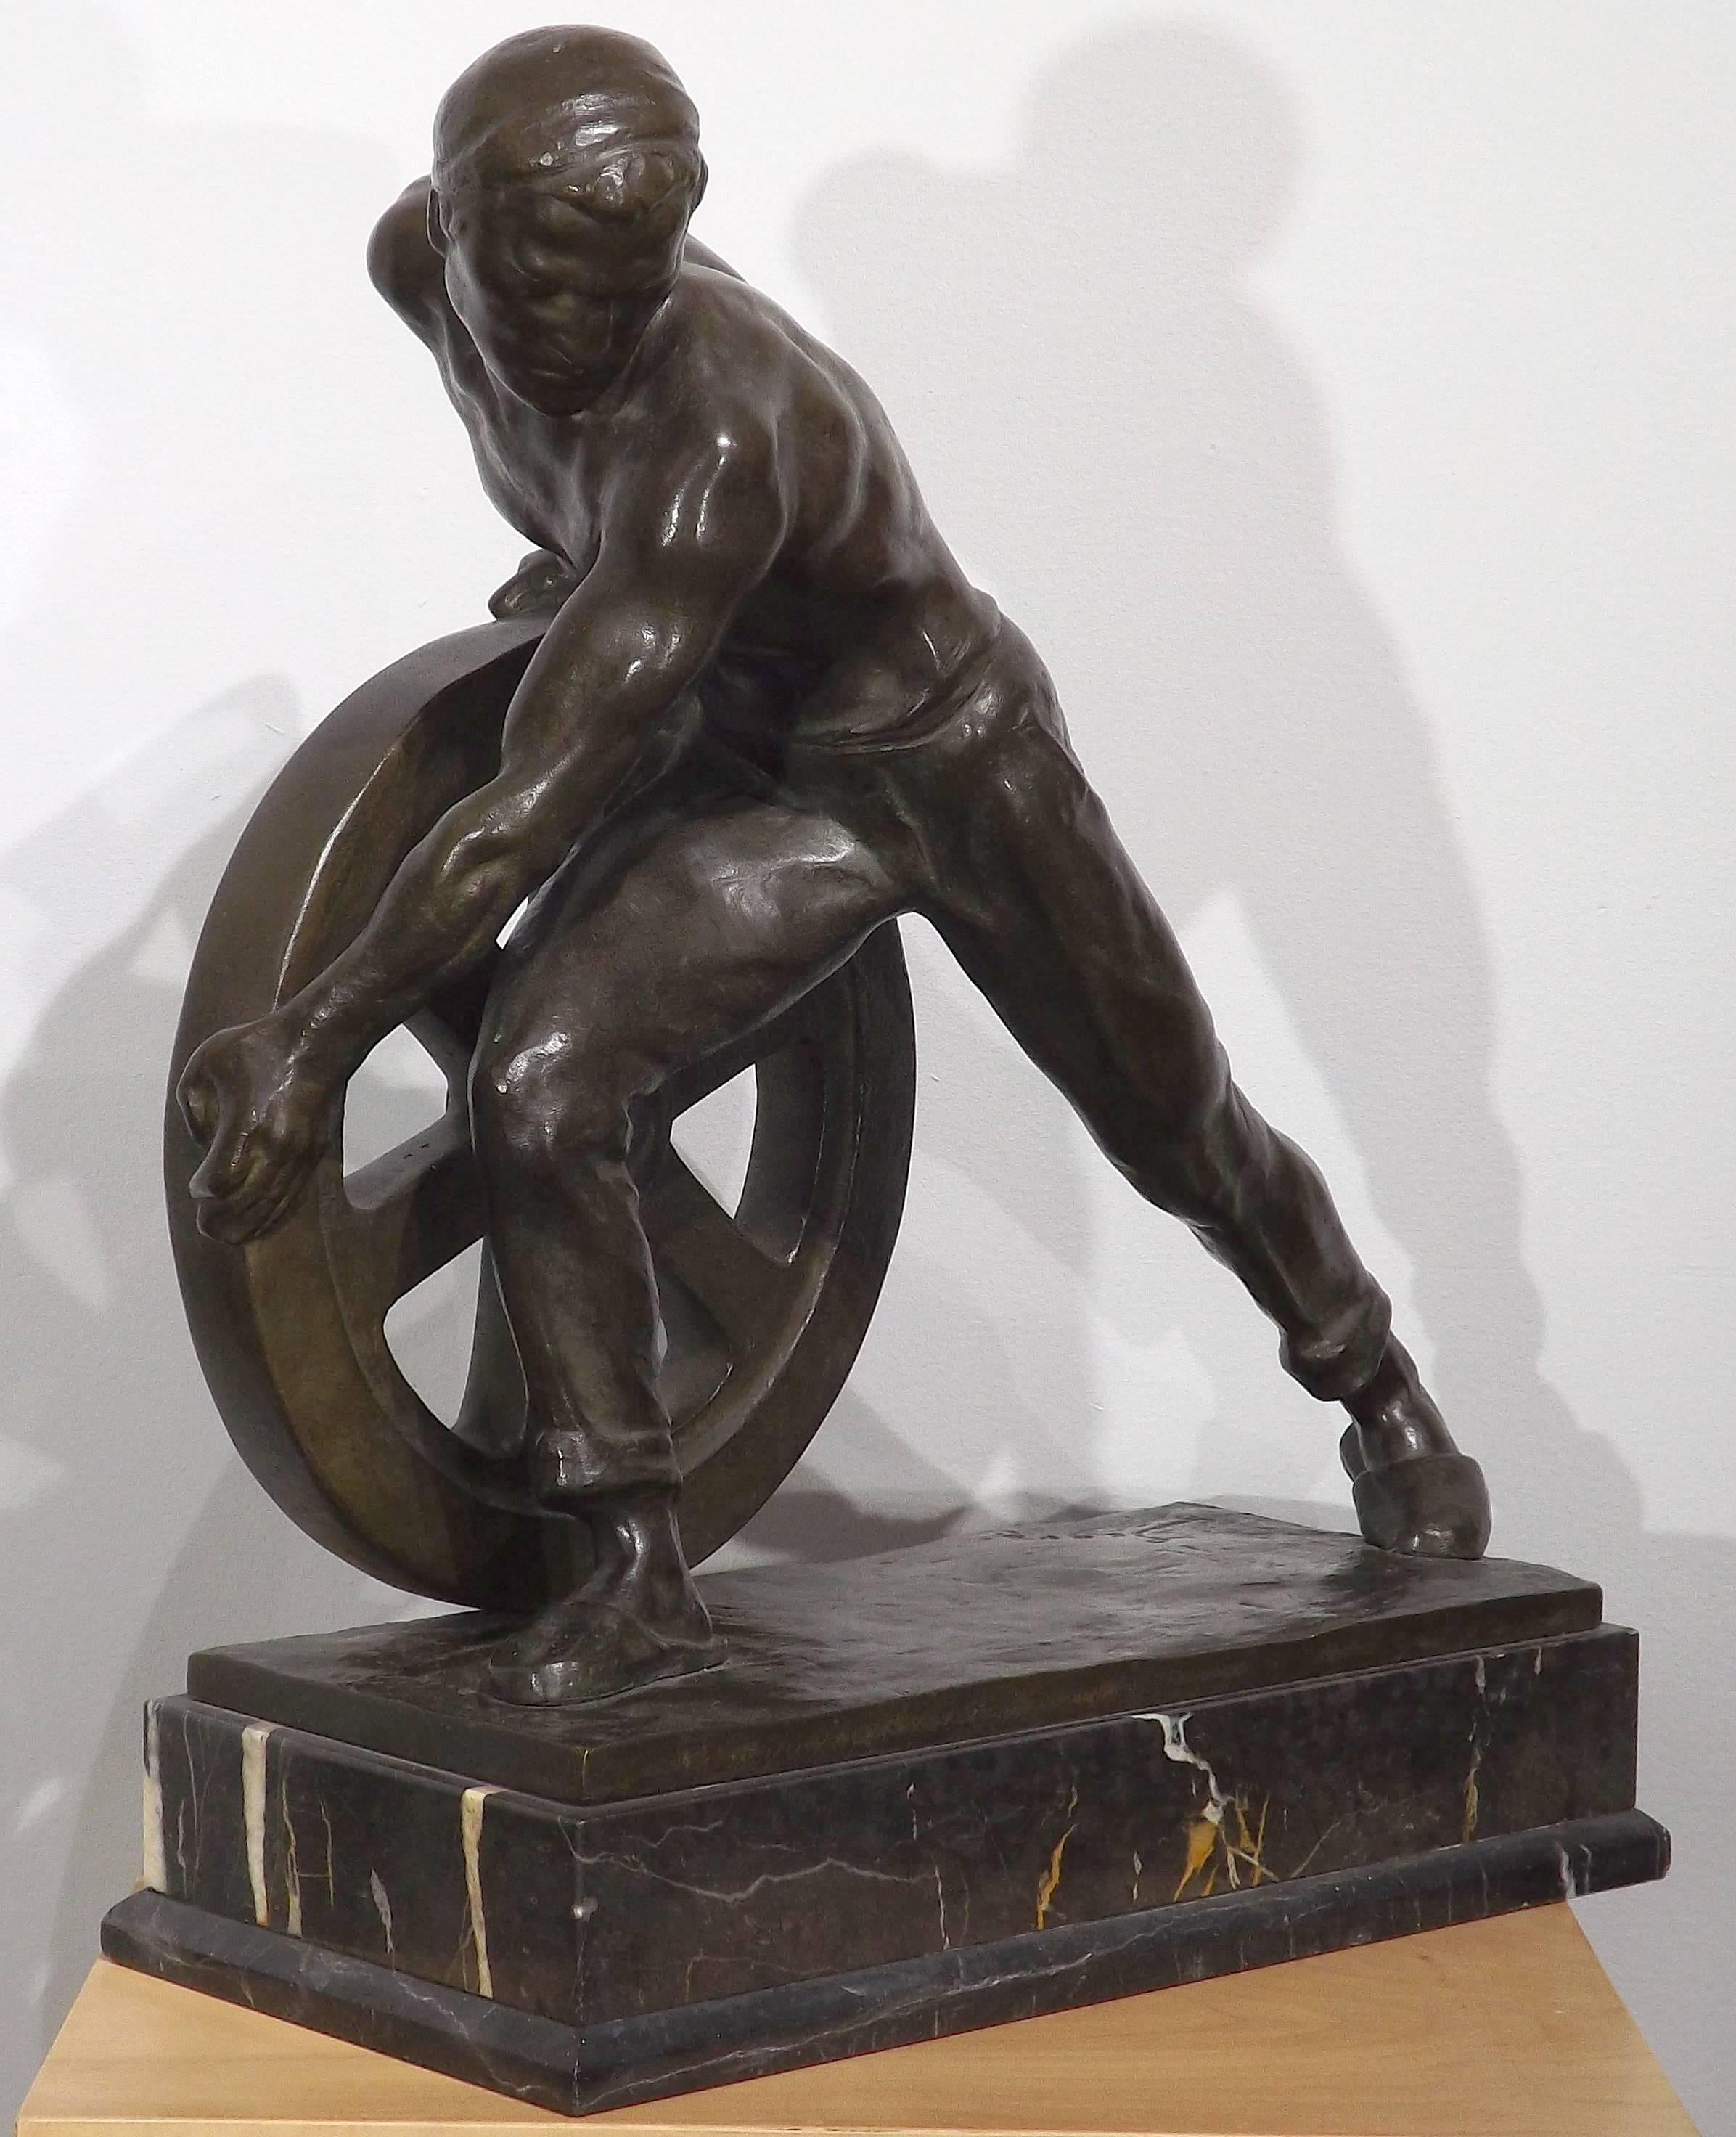 A powerful bronze of a worker laboring hard at pushing a wheel, done by famed German sculptor Ernst Seger (1868-1939). The worker appears to be using every bit of his strength to control the massive wheel, his body stretched to the limits.

Erns